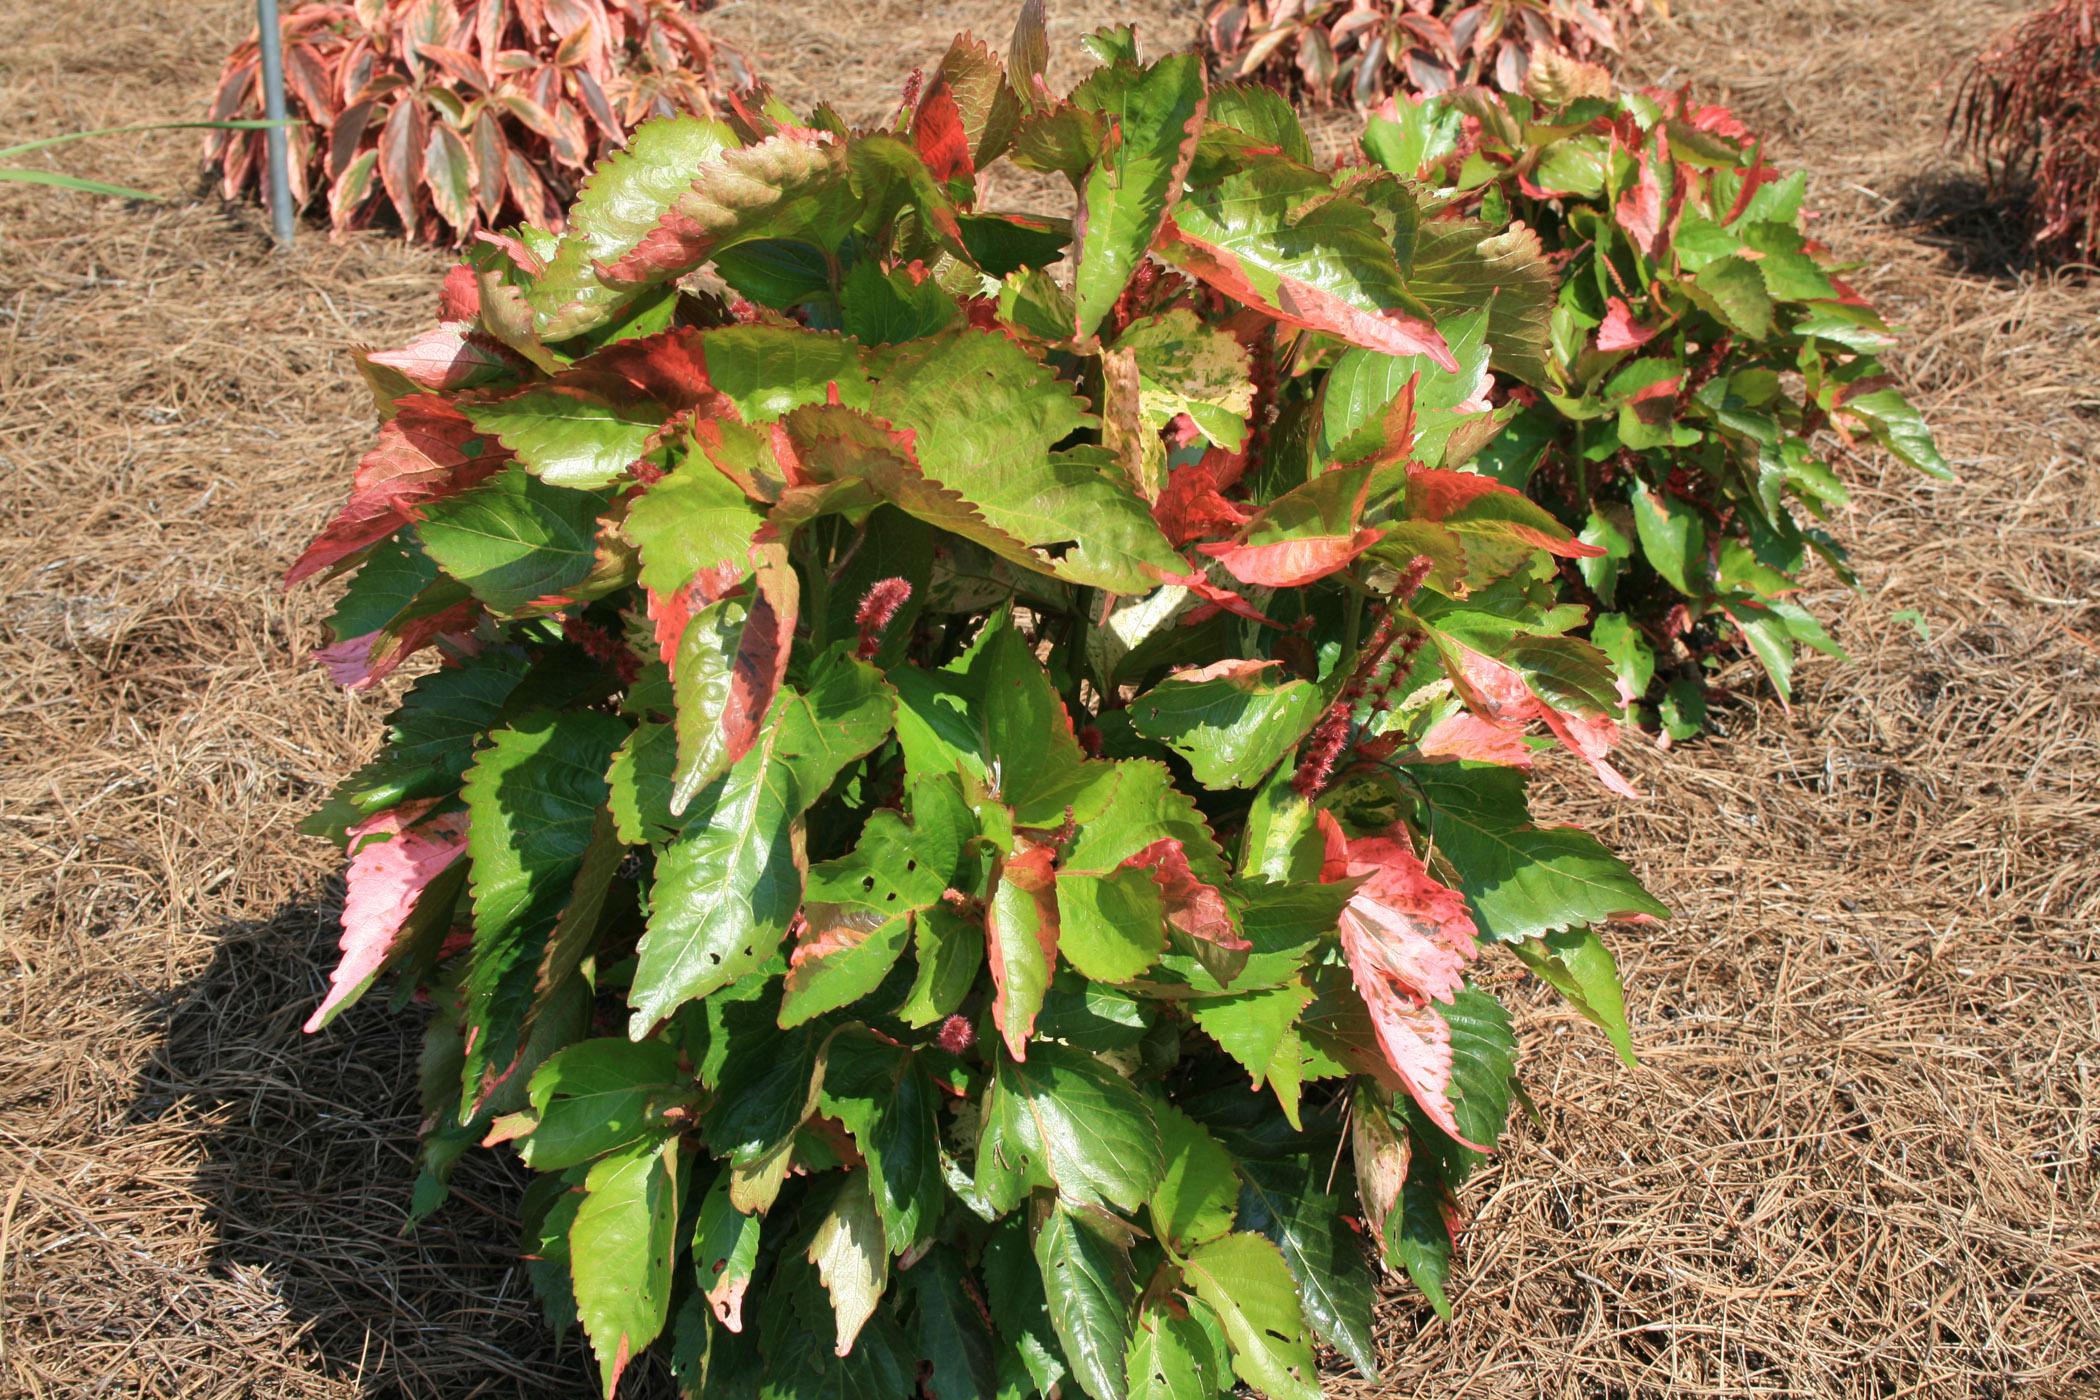 The copperleaf variety Loco has variegated green and white leaves with coppery accents. (Photo by MSU Extension Service/Gary Bachman)